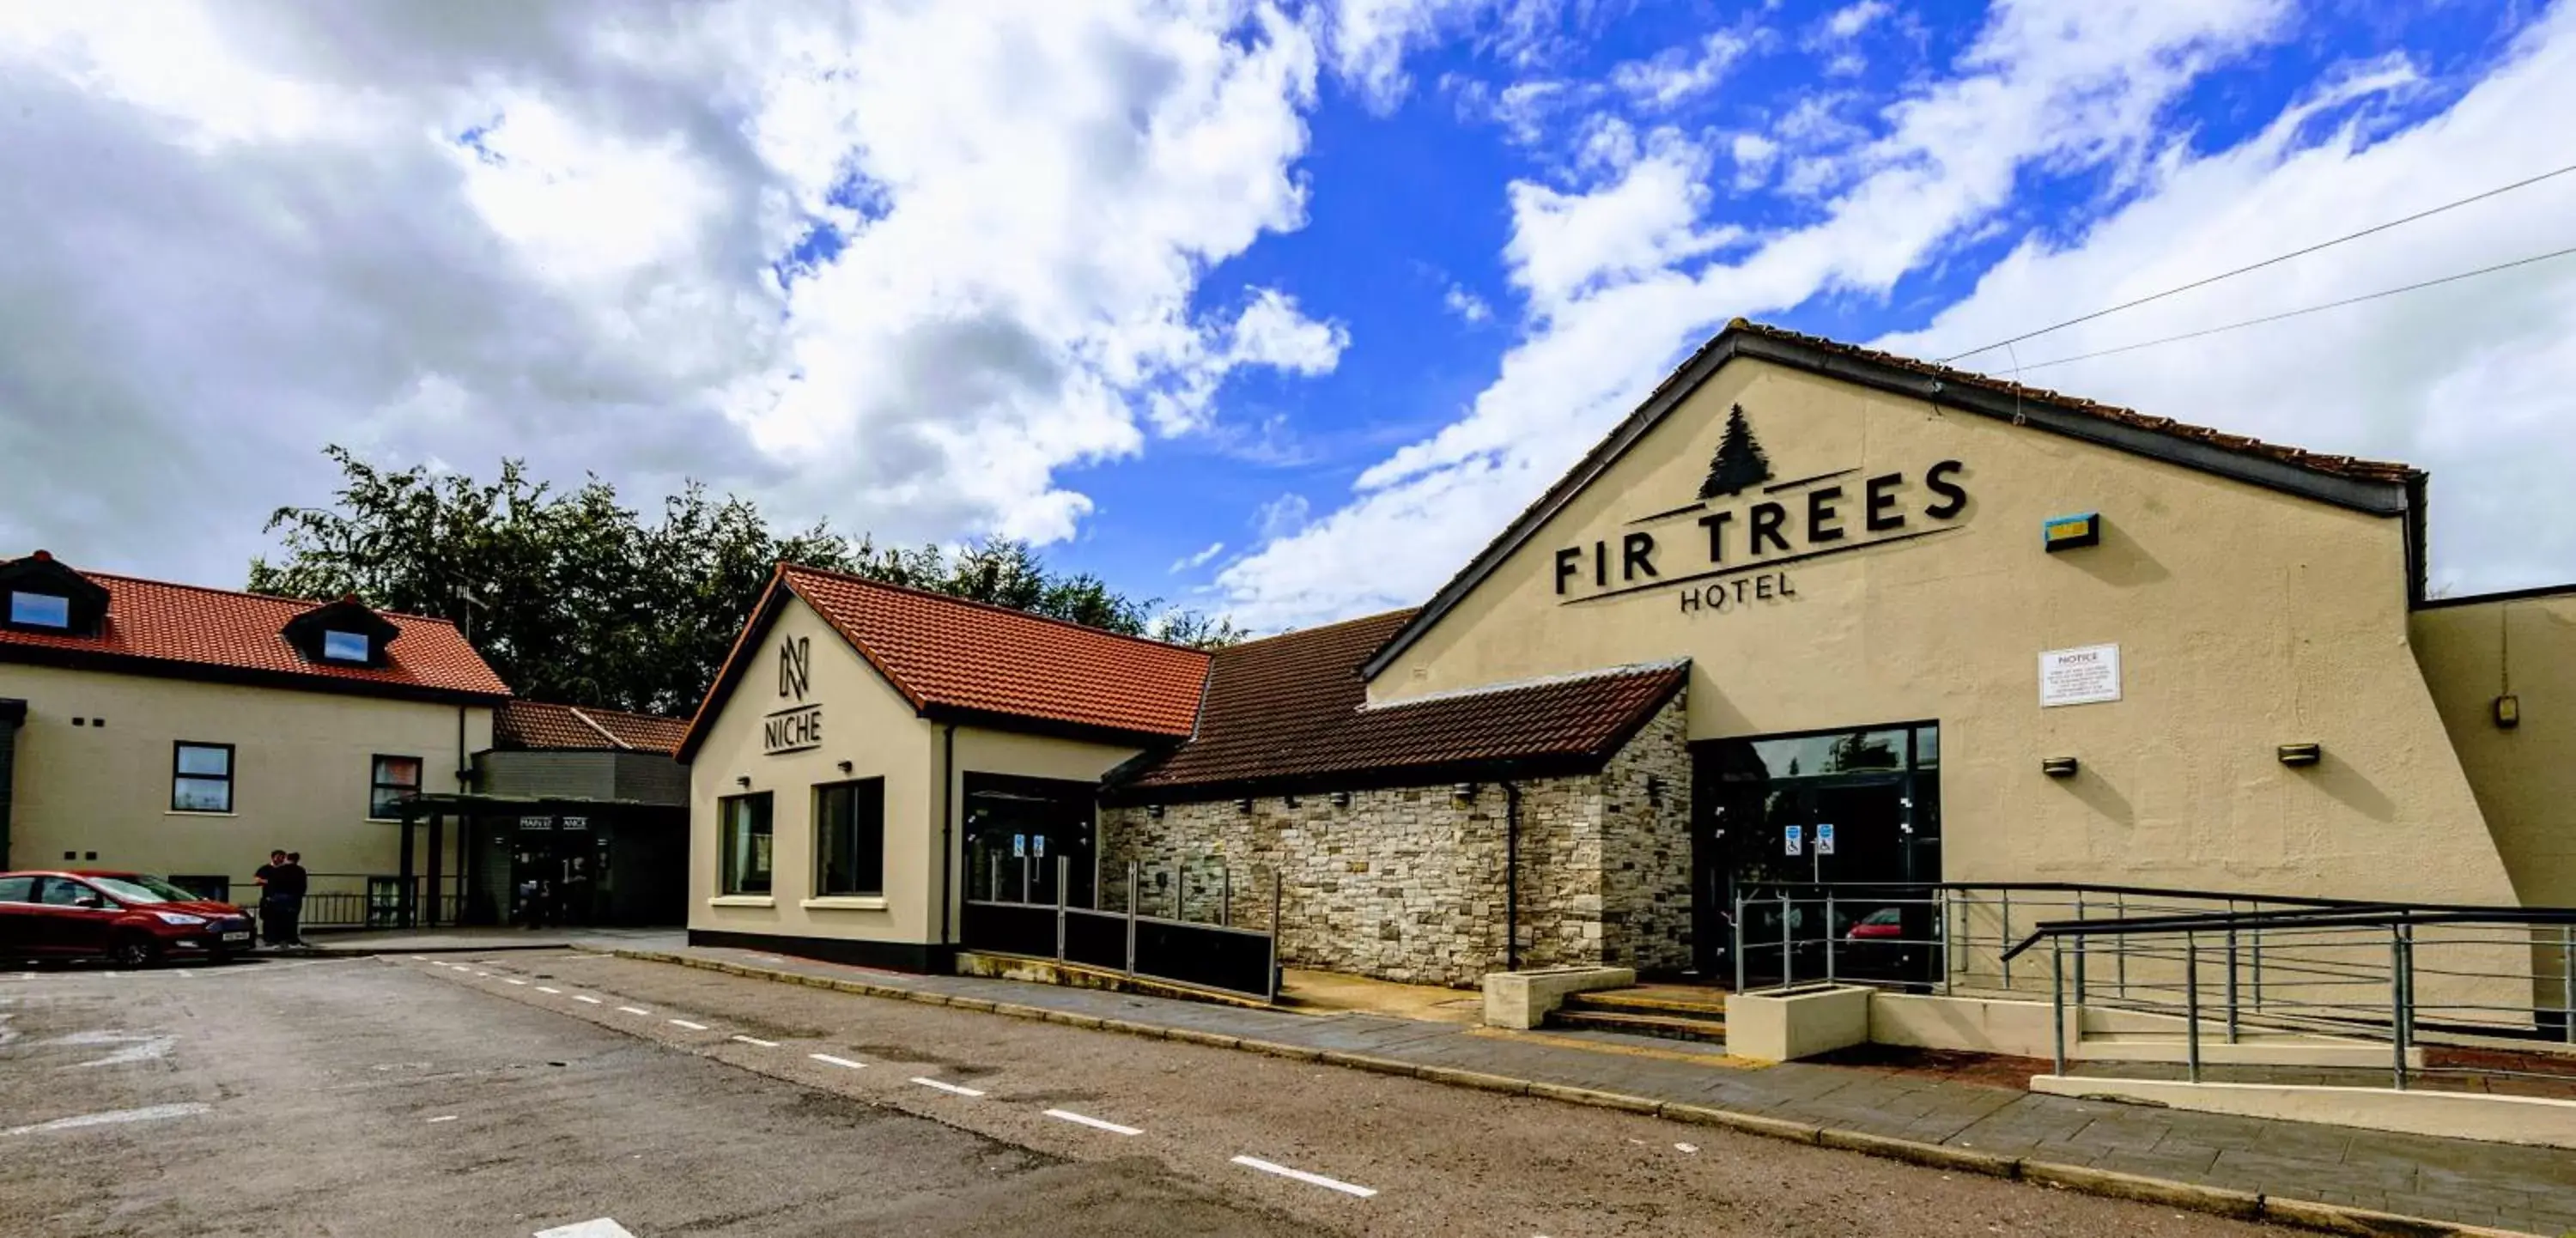 Property building in Fir Trees Hotel